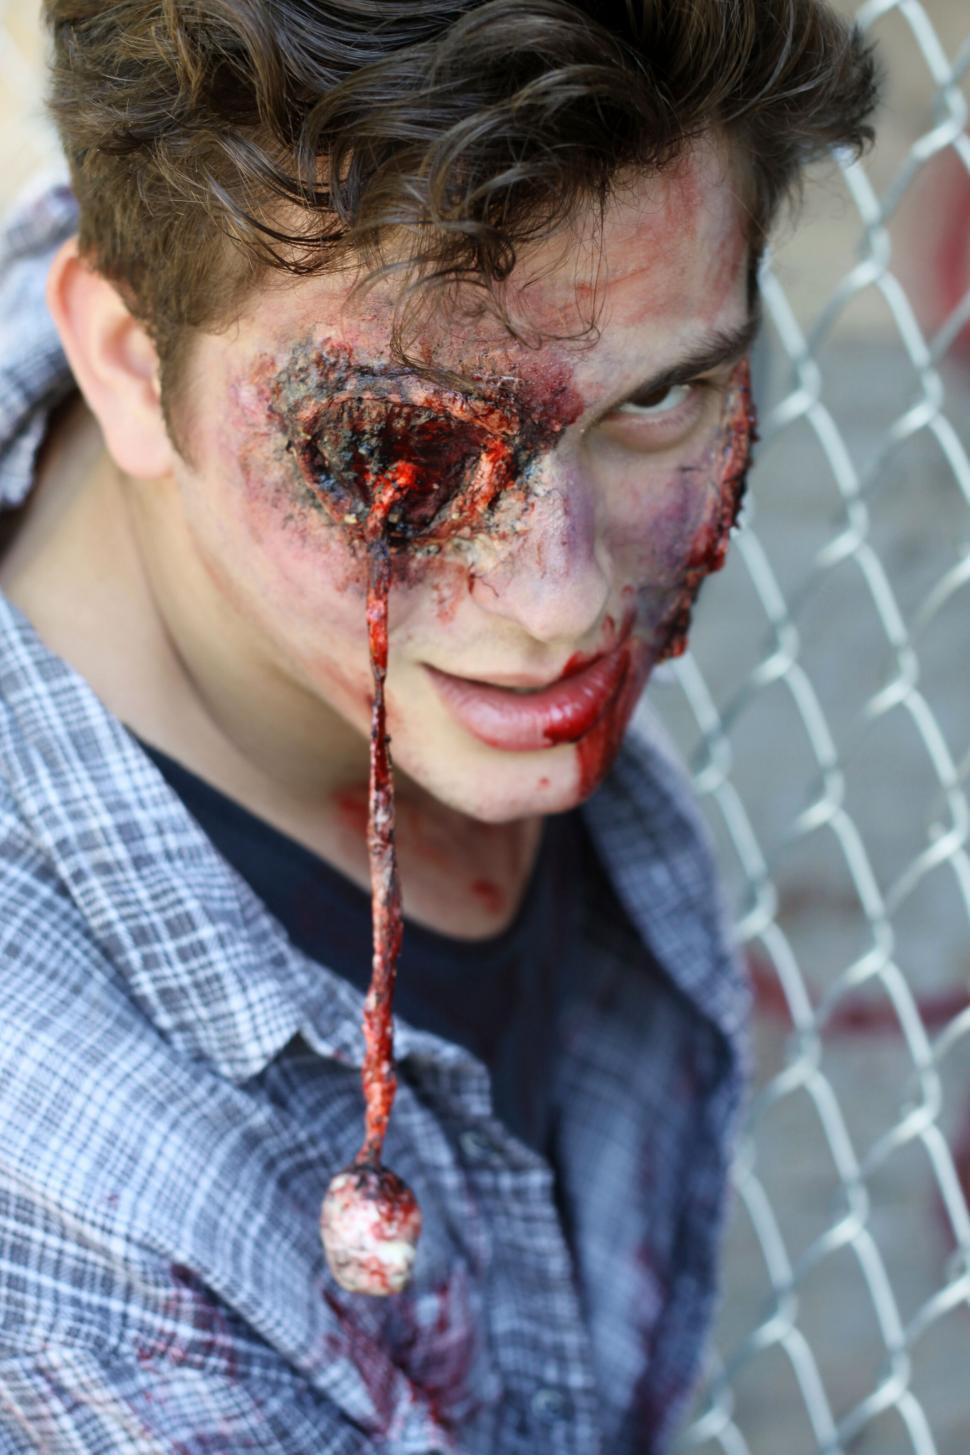 Free Image of Man with special effects makeup on face 